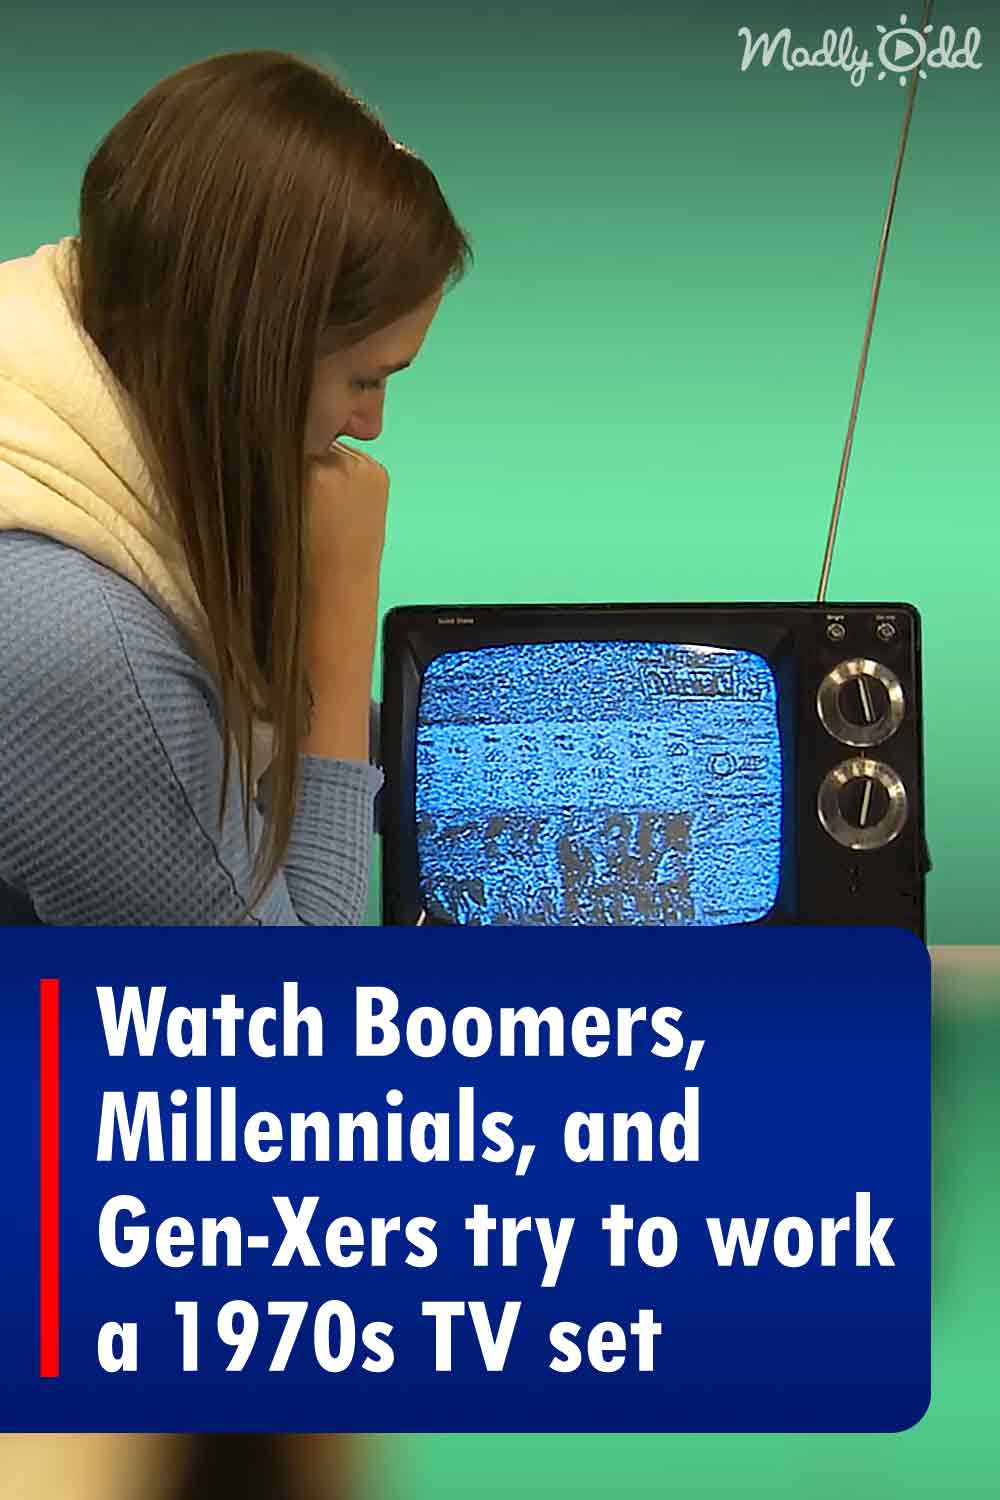 Watch Boomers, Millennials, and Gen-Xers try to work a 1970s TV set